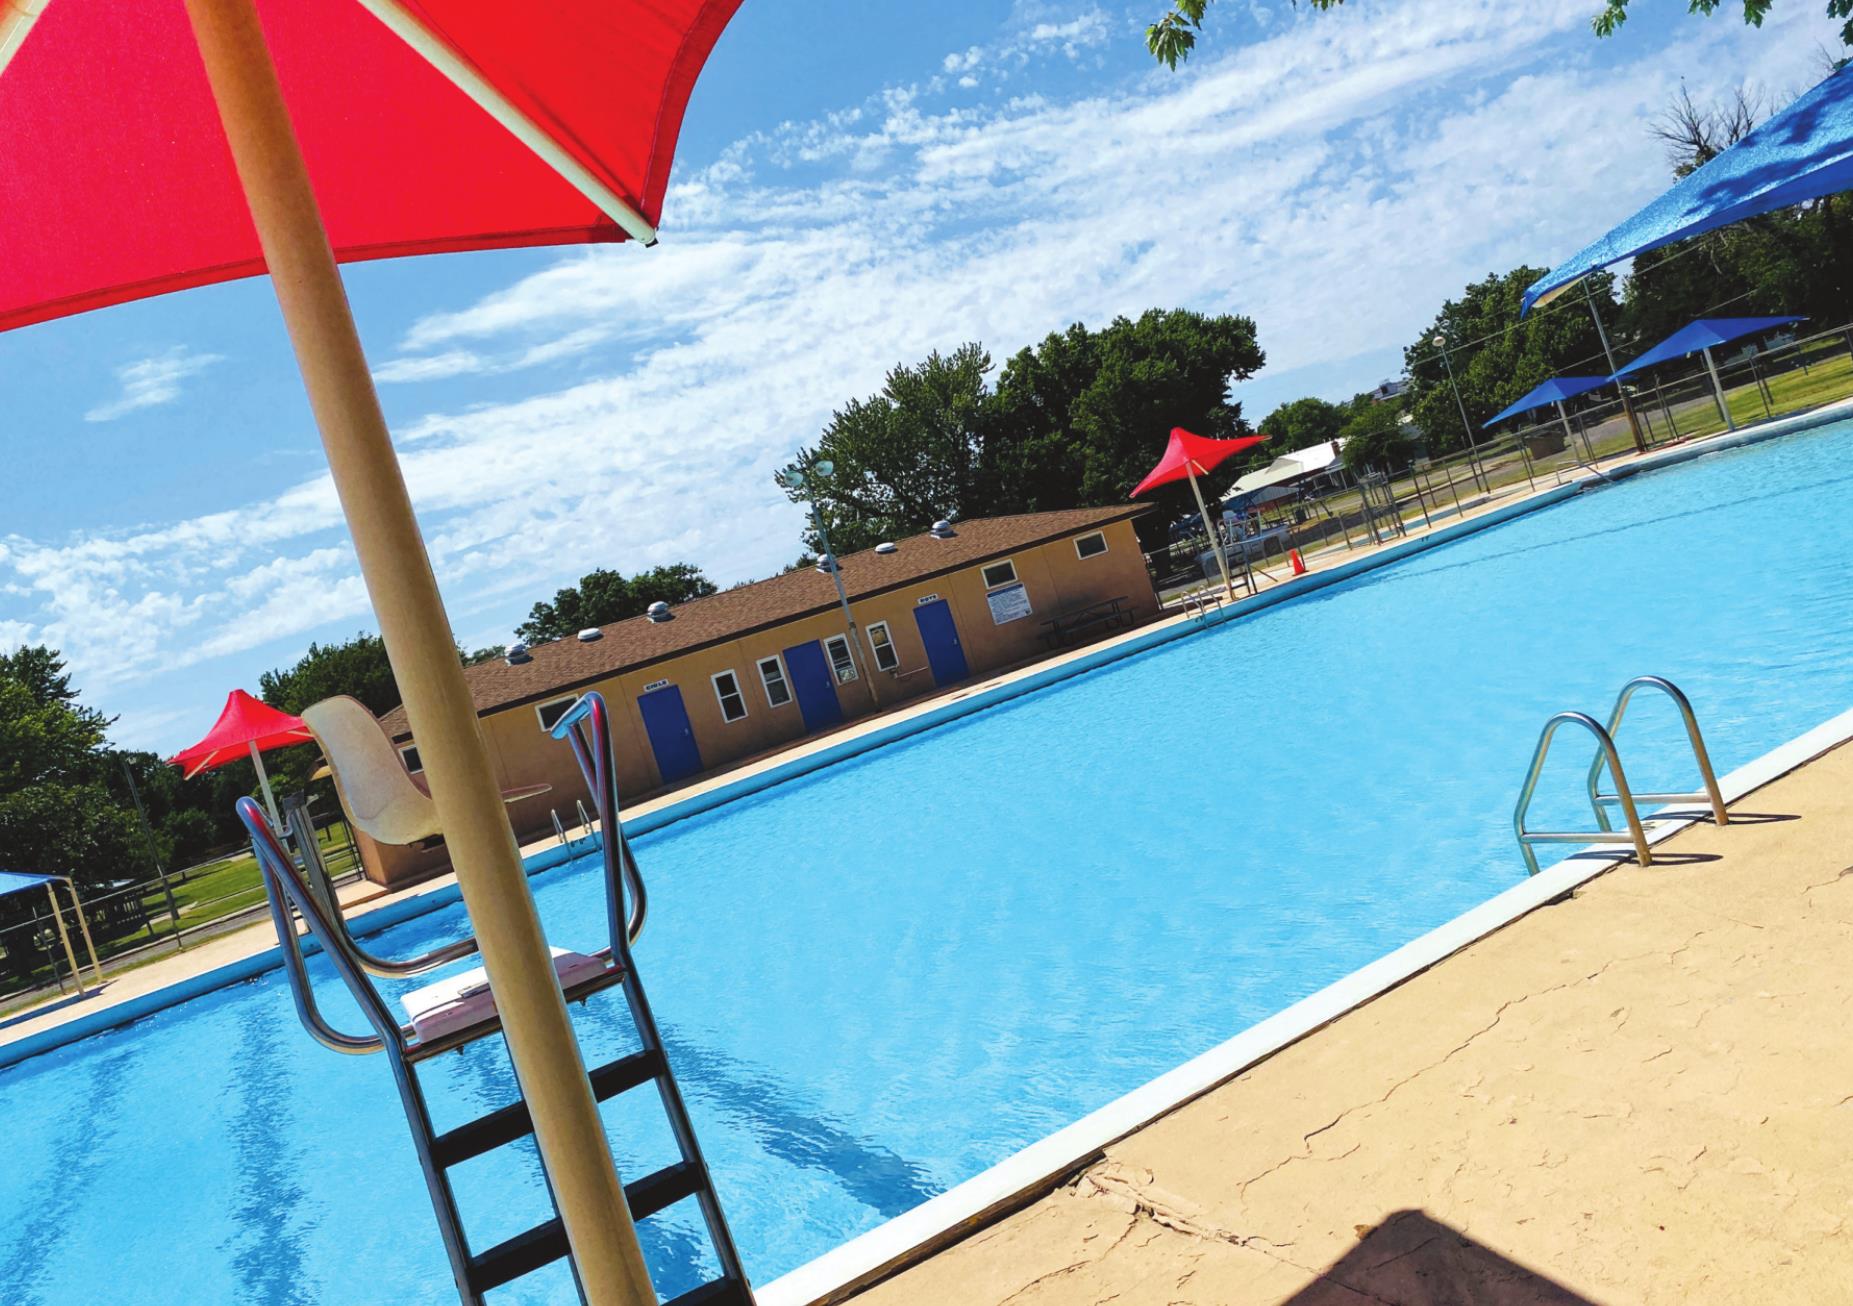 The Weatherford City Pool opens July 4 for the first time this year.